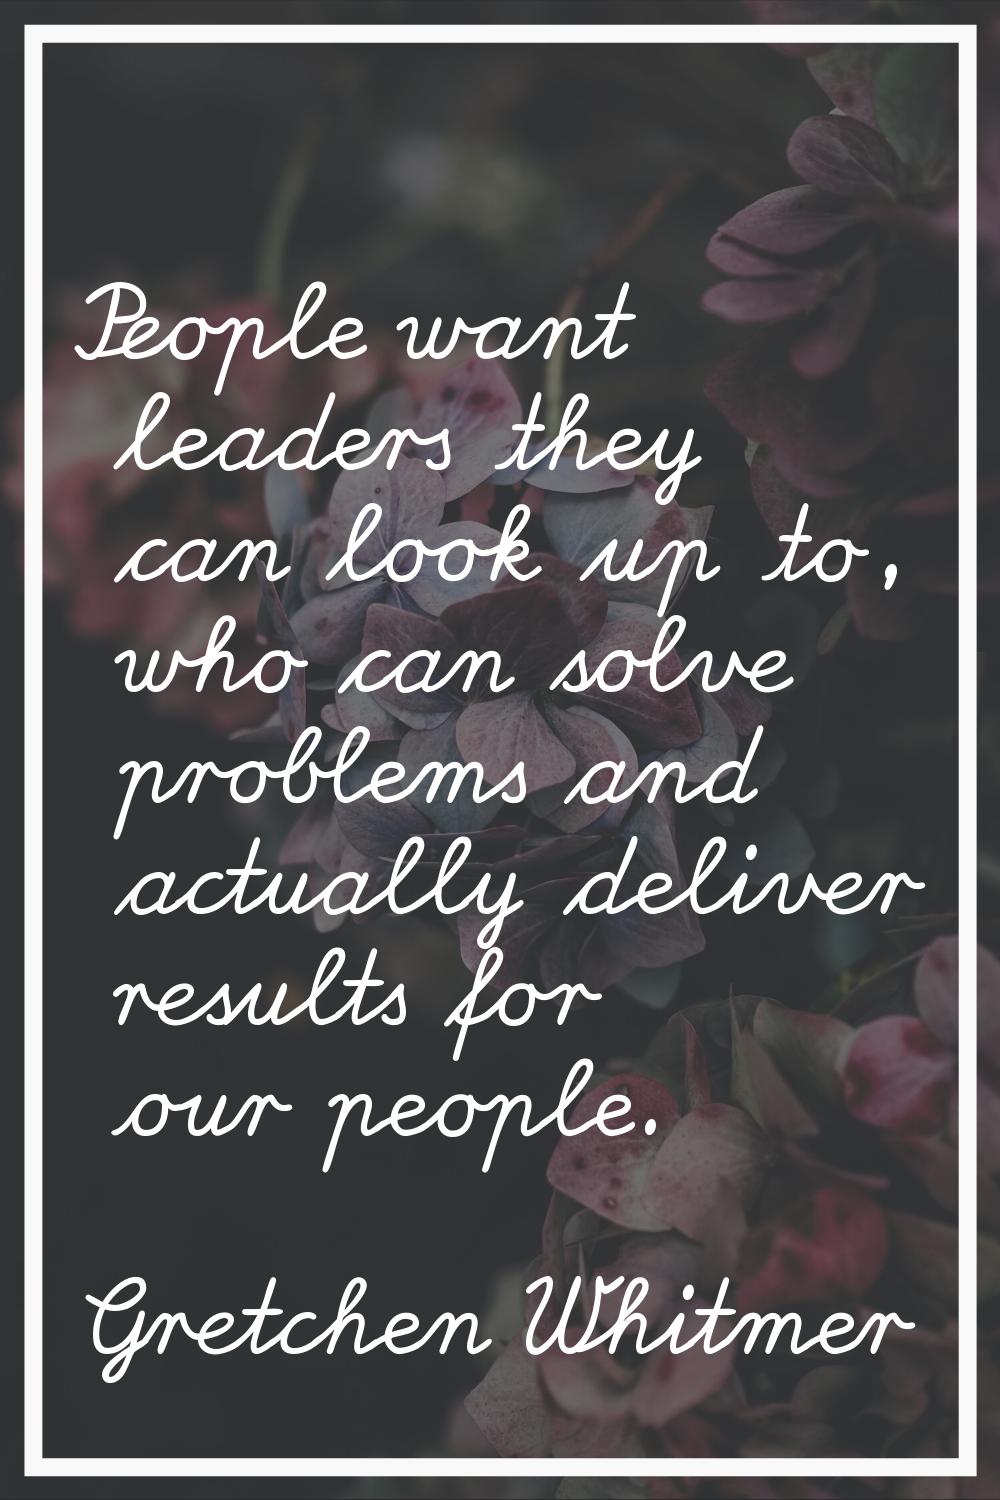 People want leaders they can look up to, who can solve problems and actually deliver results for ou